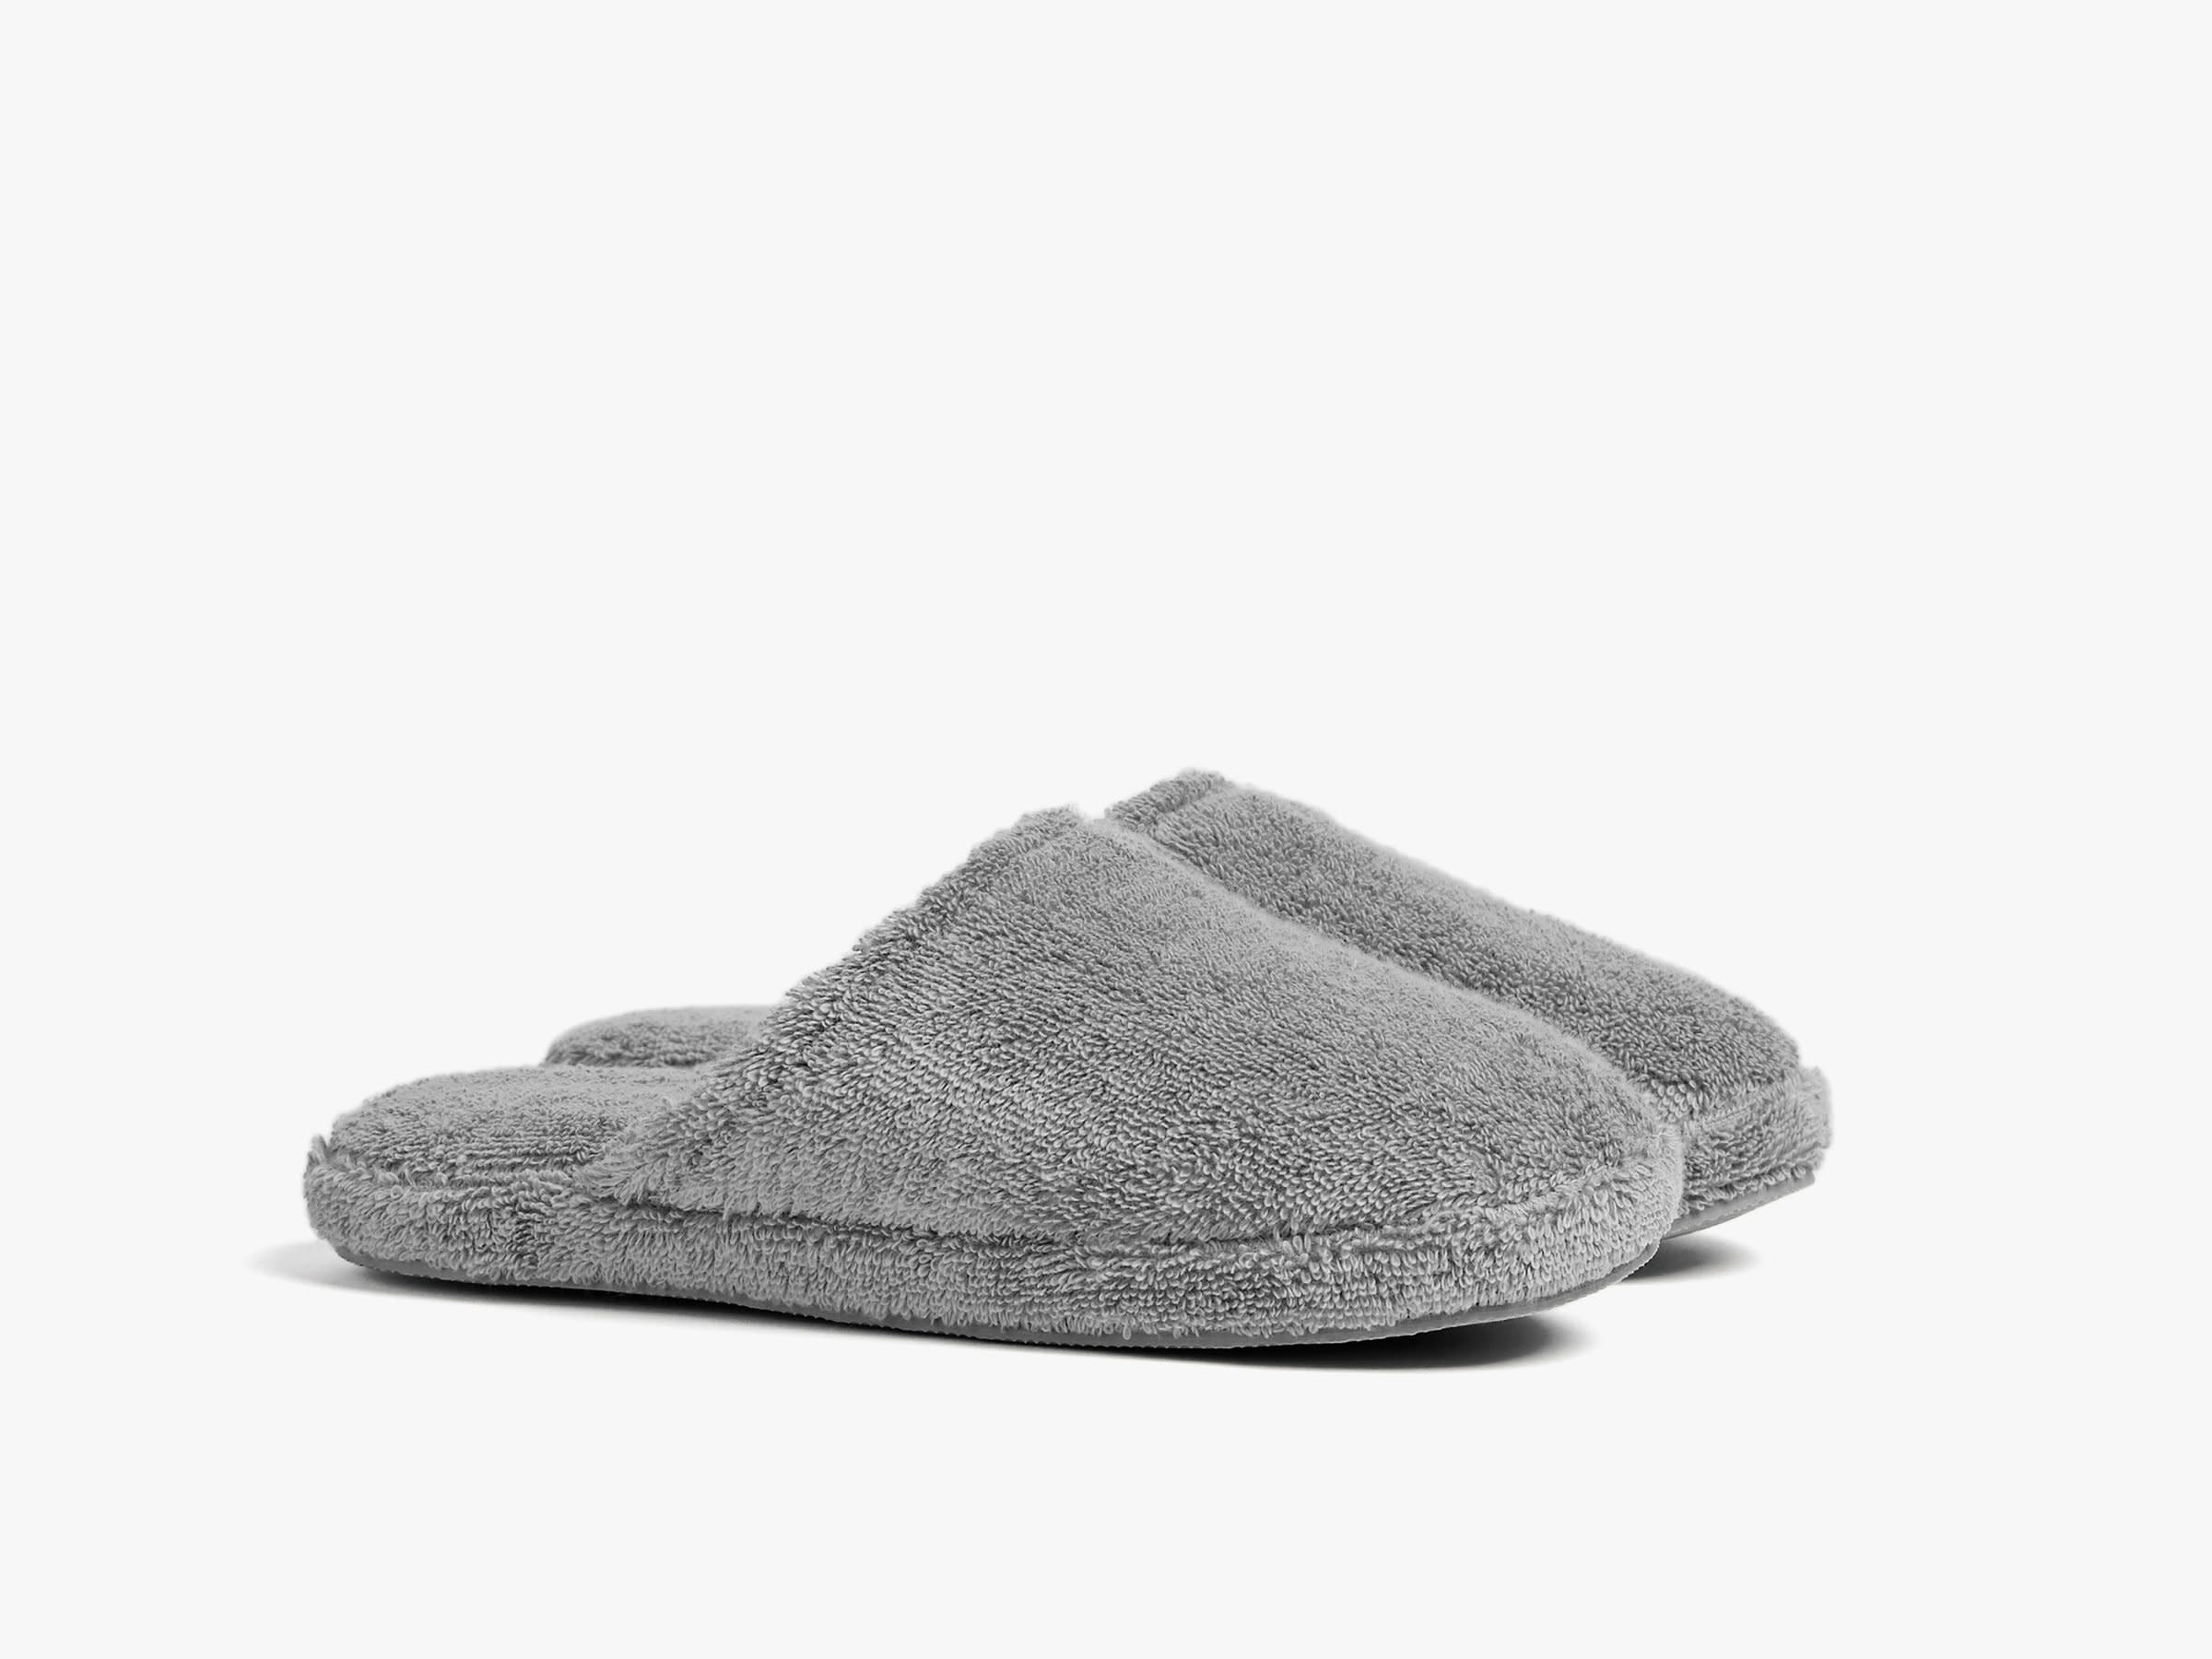 Stone Classic Turkish Cotton Slippers Product Image